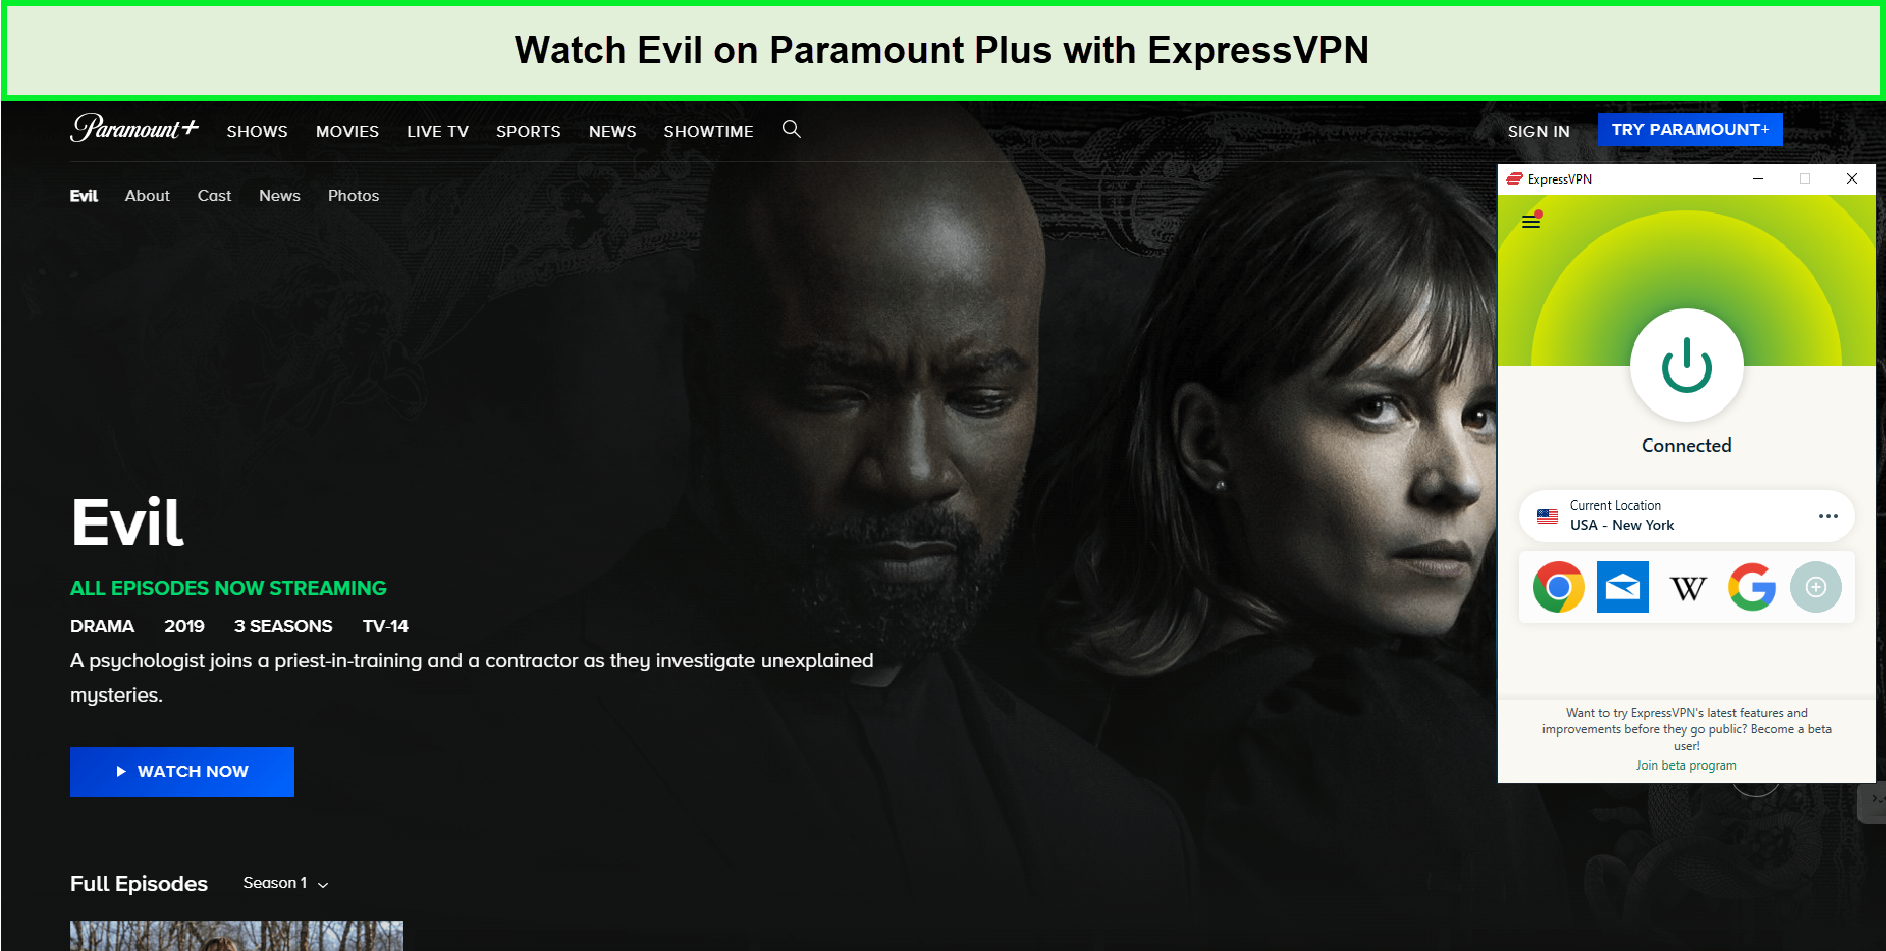 Watch-Evil-All-Seasons-in-Japan-on-Paramount-Plus-with-ExpressVPN